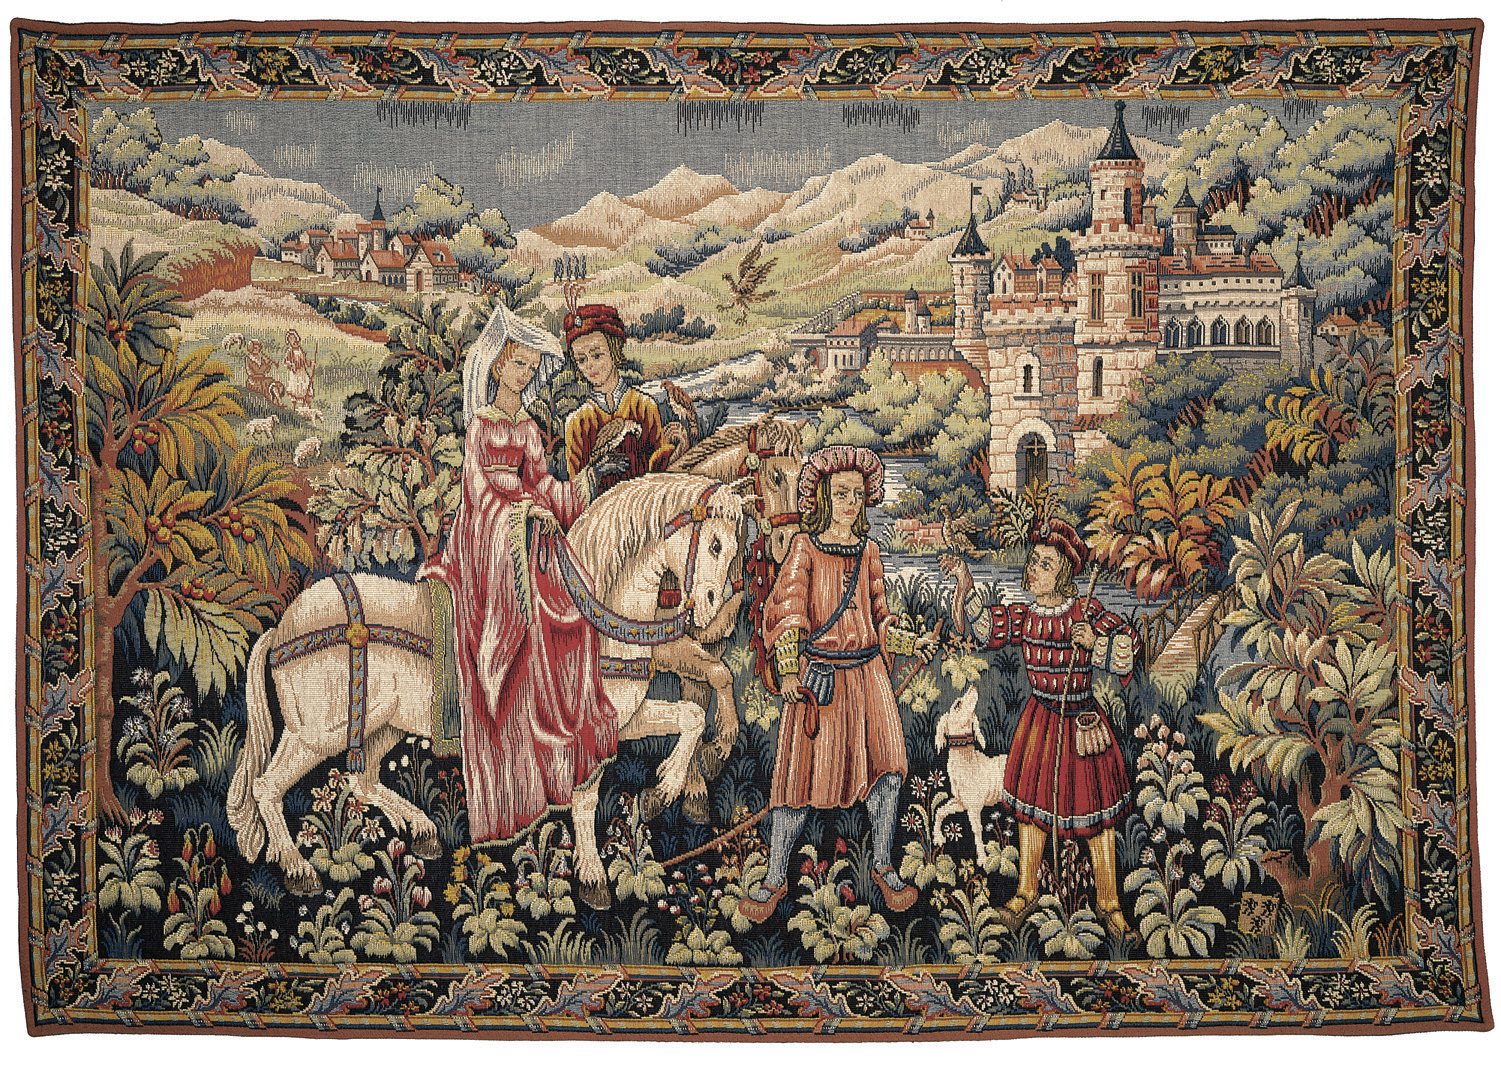 Norman & Medieval Wall-hanging Tapestries from the Middle Ages.